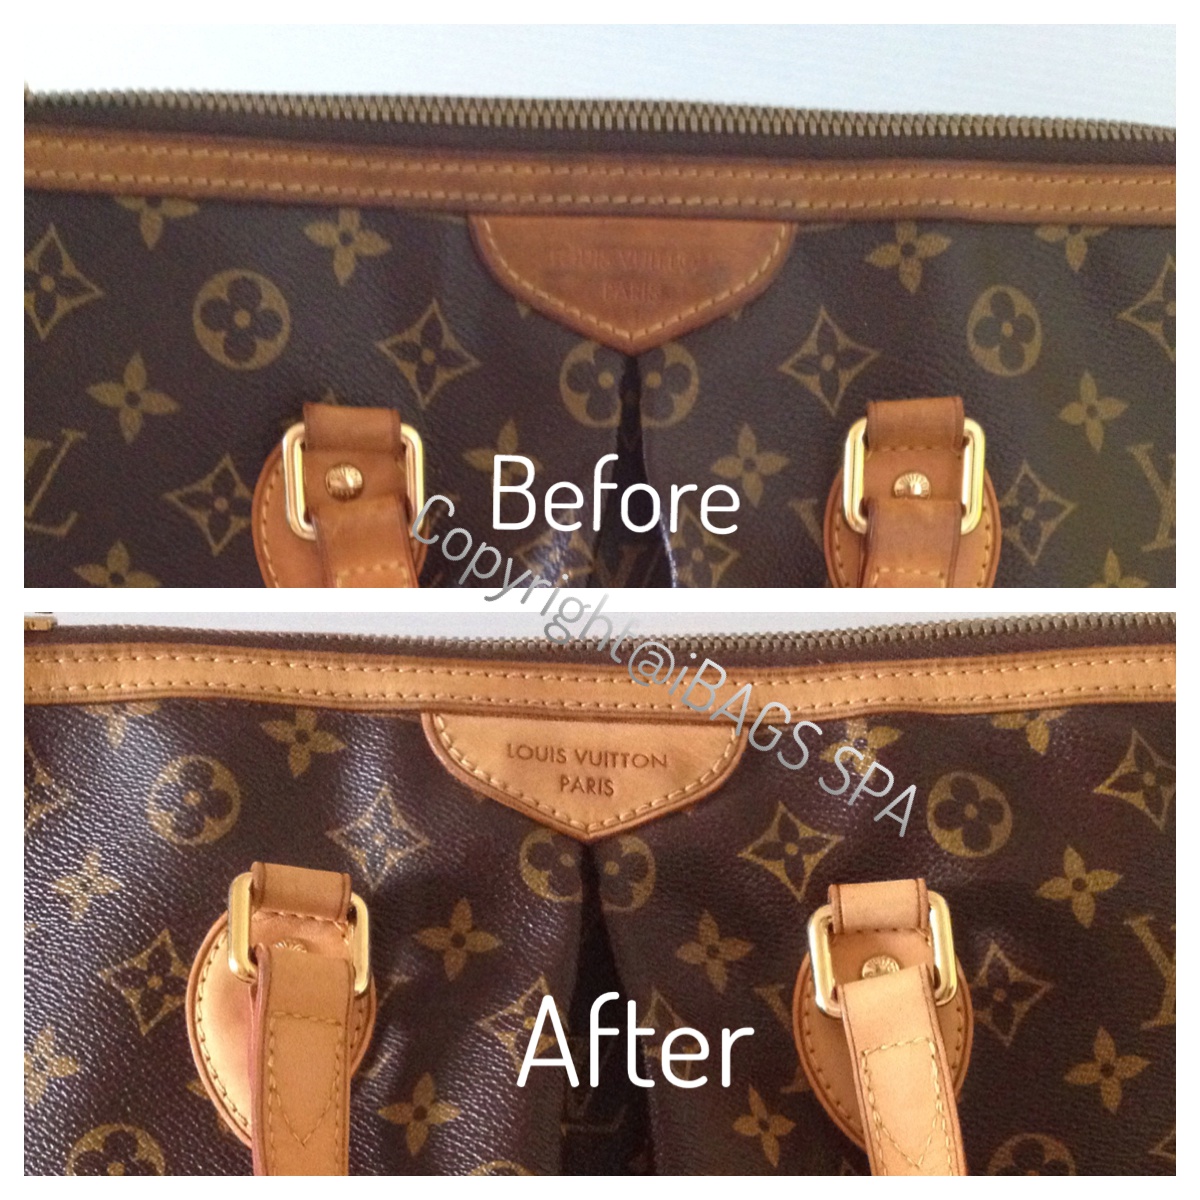 patina cleaning starting at $200! If your vachetta leather has any